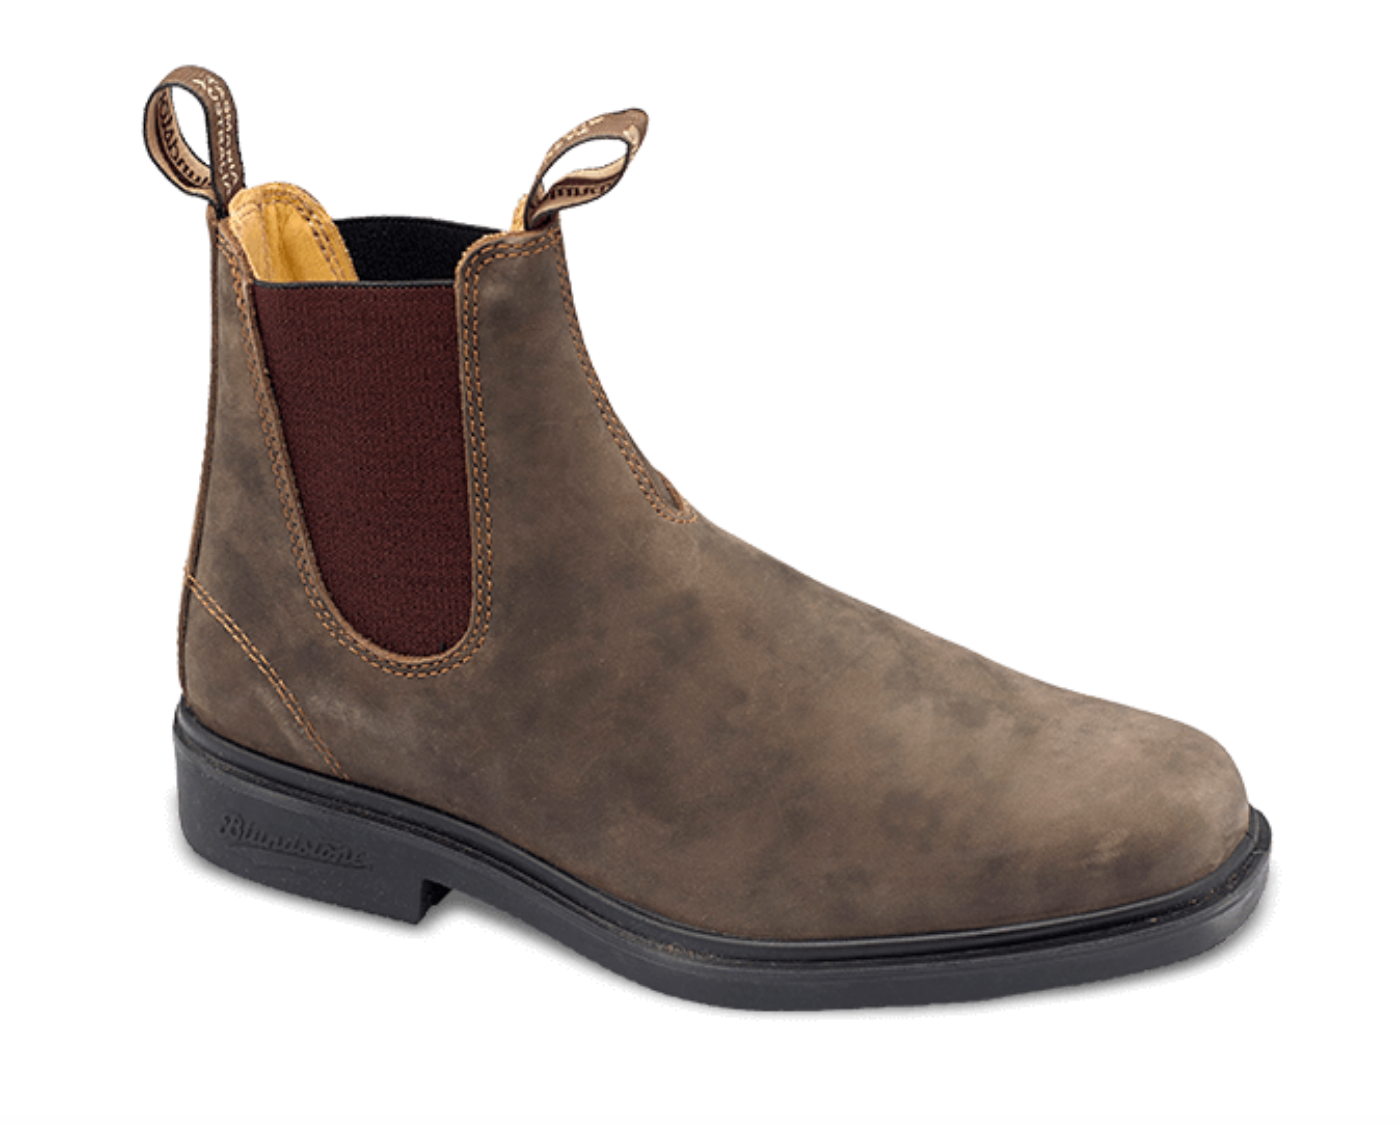 blundstone chelsea boots